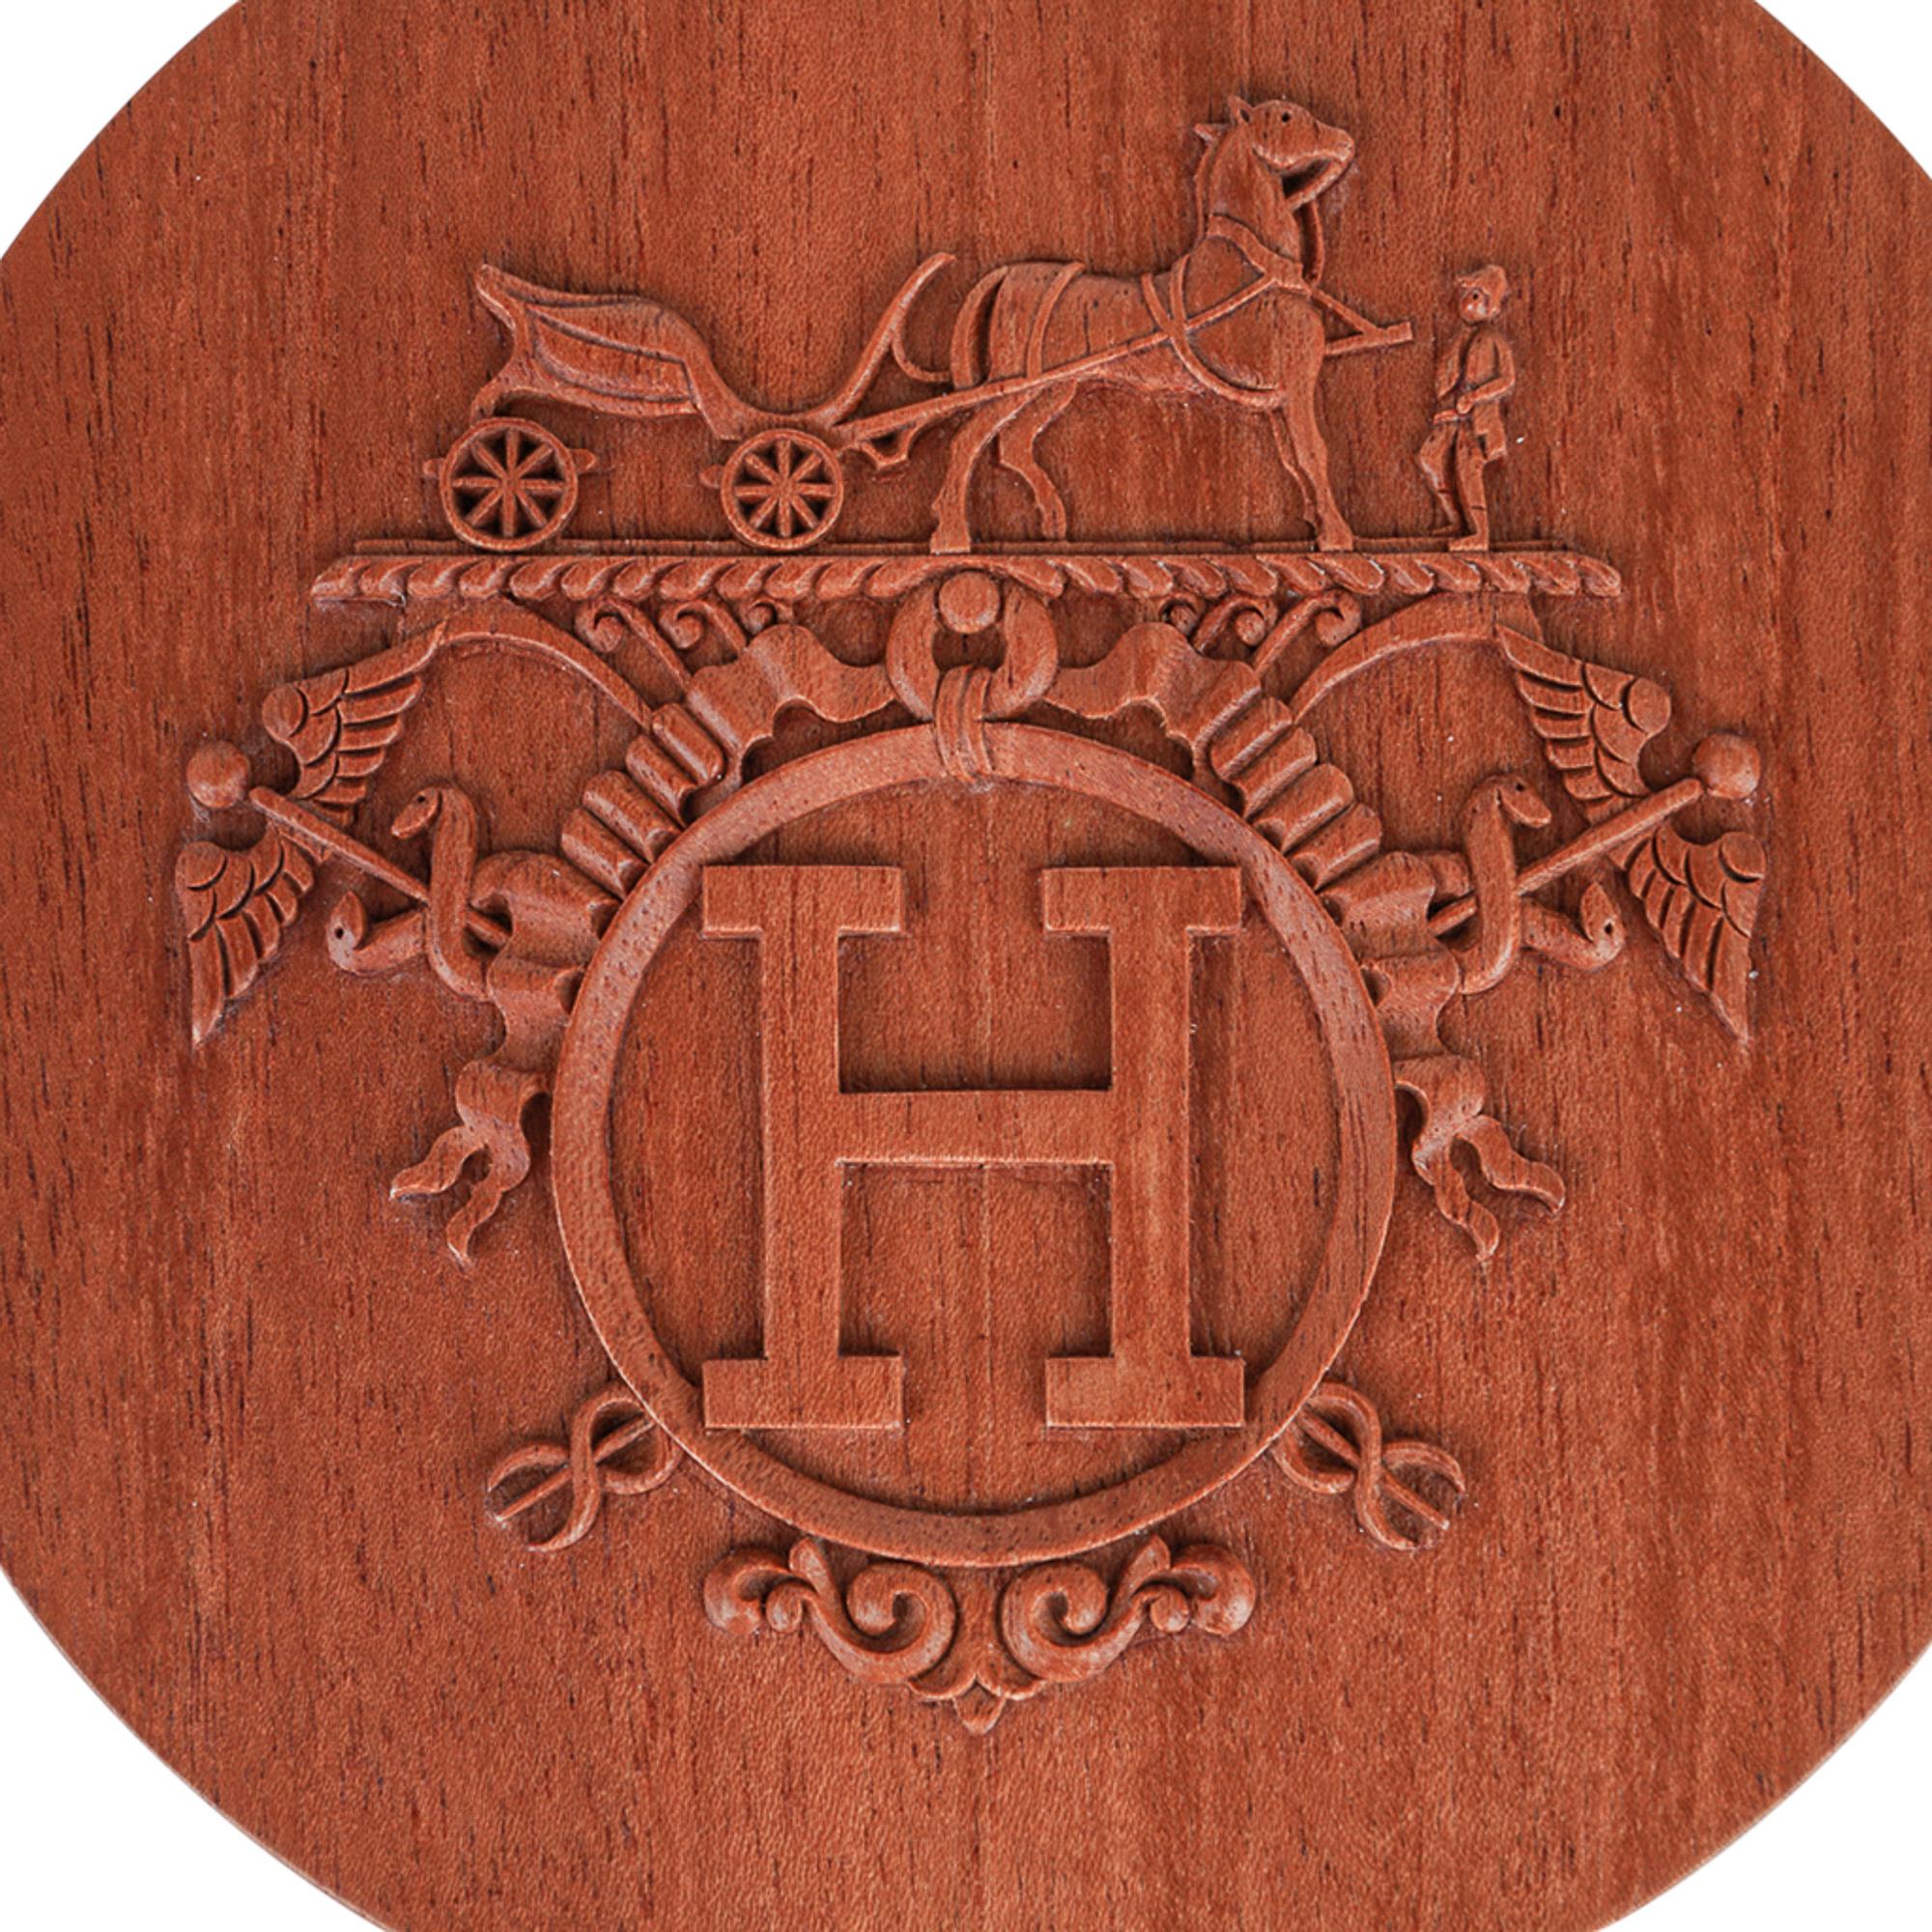 Mightychic offers a guaranteed authentic Hermes Boite Ronde Ex-Libris Twilly box.
Hand carved in rich Mahogany wood.
Exquisite display piece in any room.
Use for your twillies, or to keep your mementos in secret!
New or Pristine Store Fresh